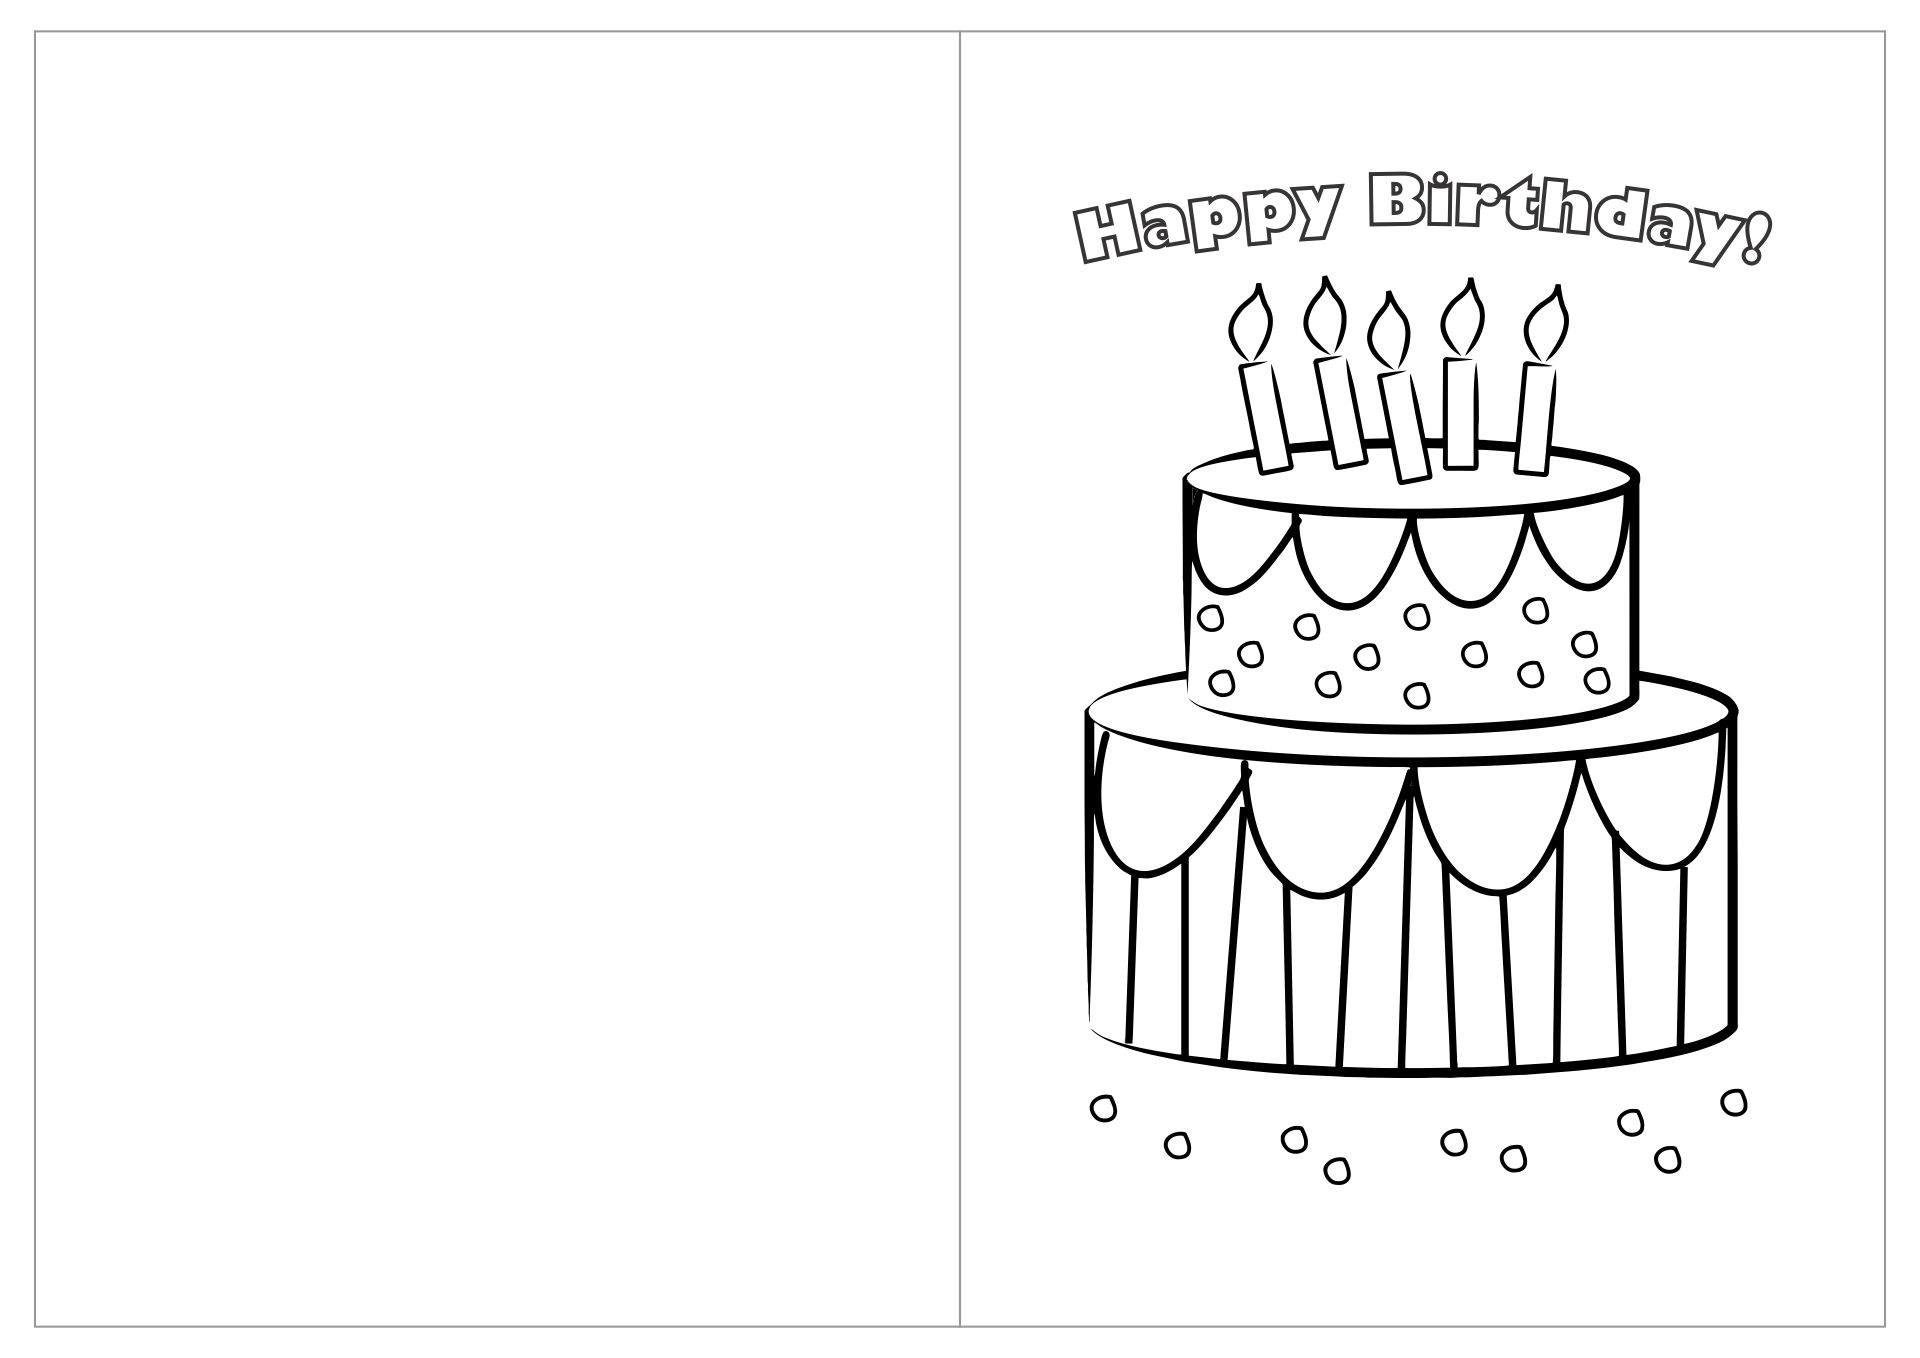 printable-coloring-birthday-cards